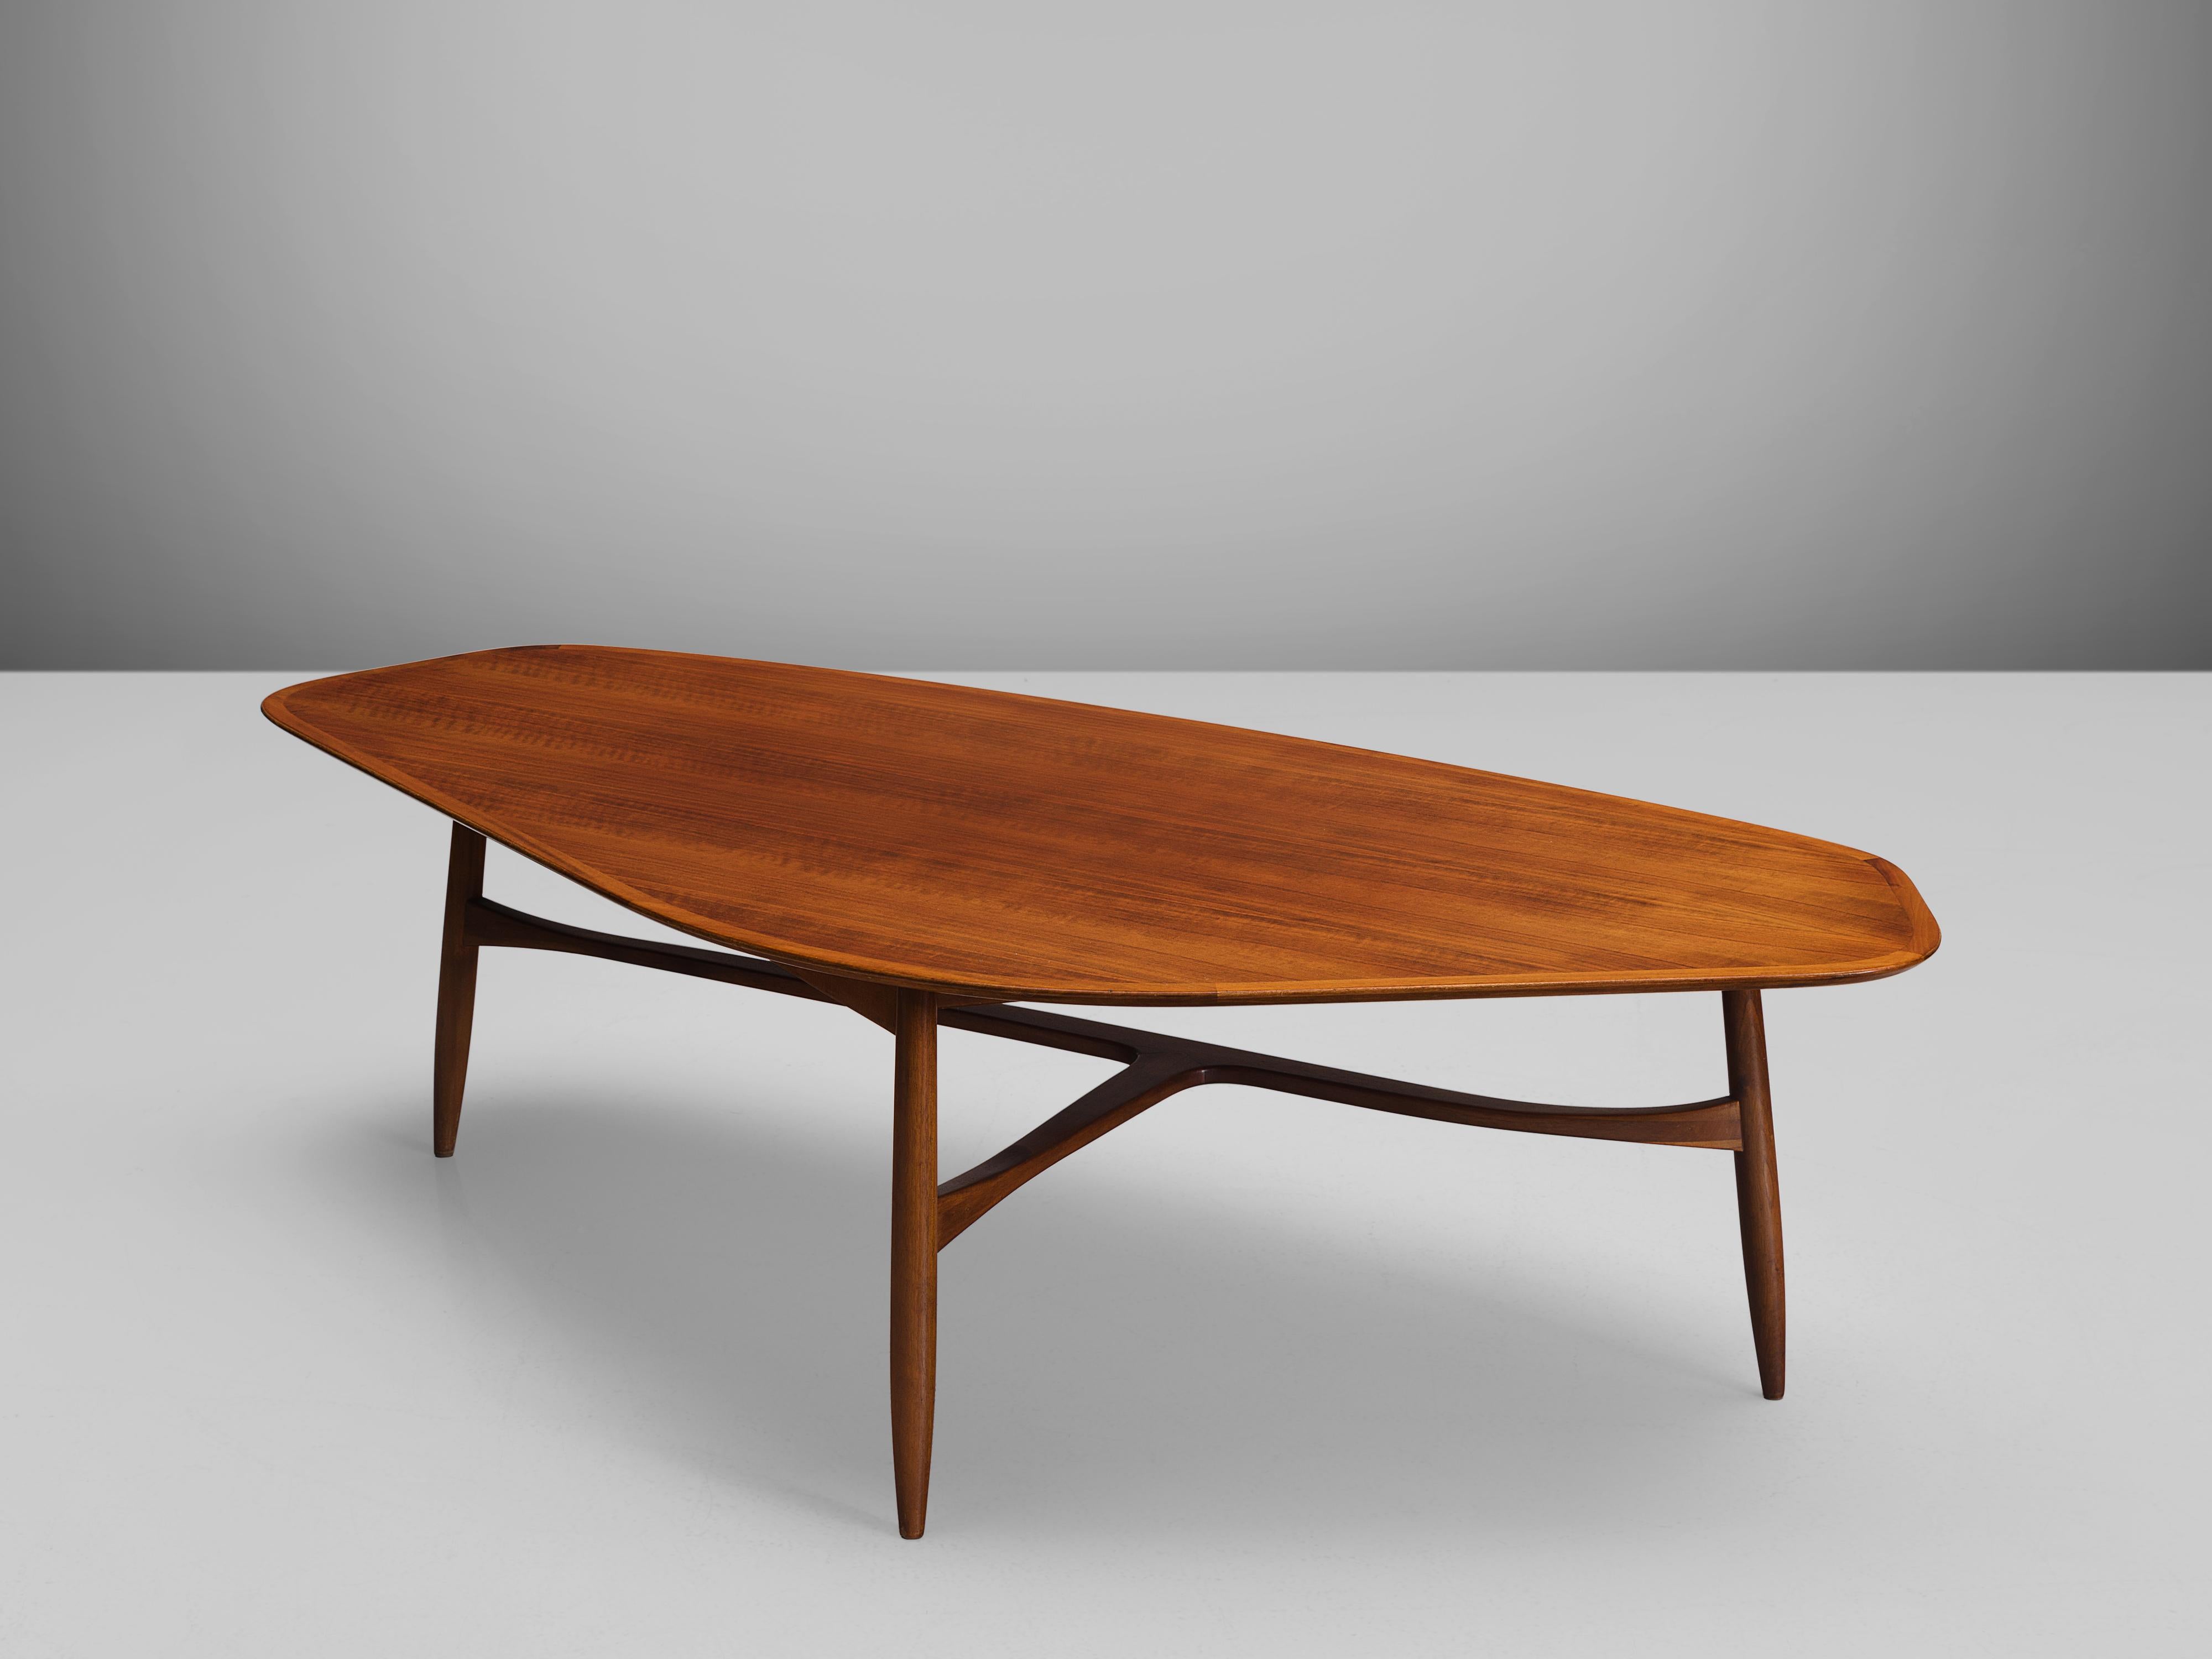 Svante Skogh, coffee table, walnut, Sweden, 1950s

This freely shaped coffee table with three thin tapered legs is part is beautifully shaped and shows high attention to detail, especially by means of the connecting tripod slat between the legs.